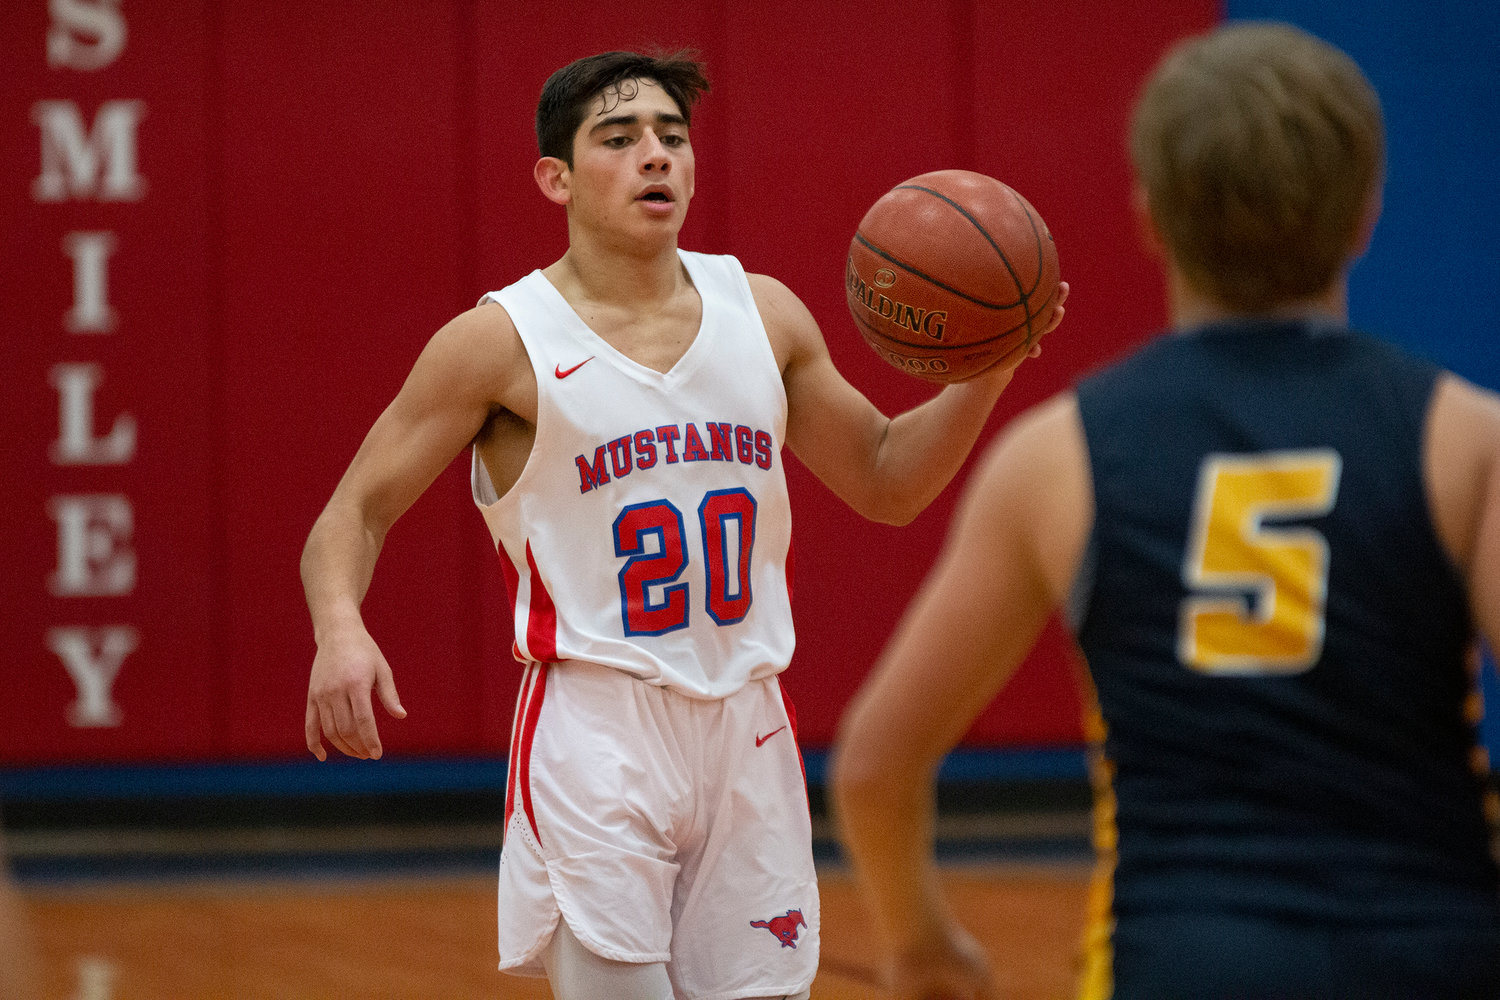 Santos Pompa (20) dribbles down the court in Nixon-Smiley’s 53-33 loss against Poth. He ended the night with two points.